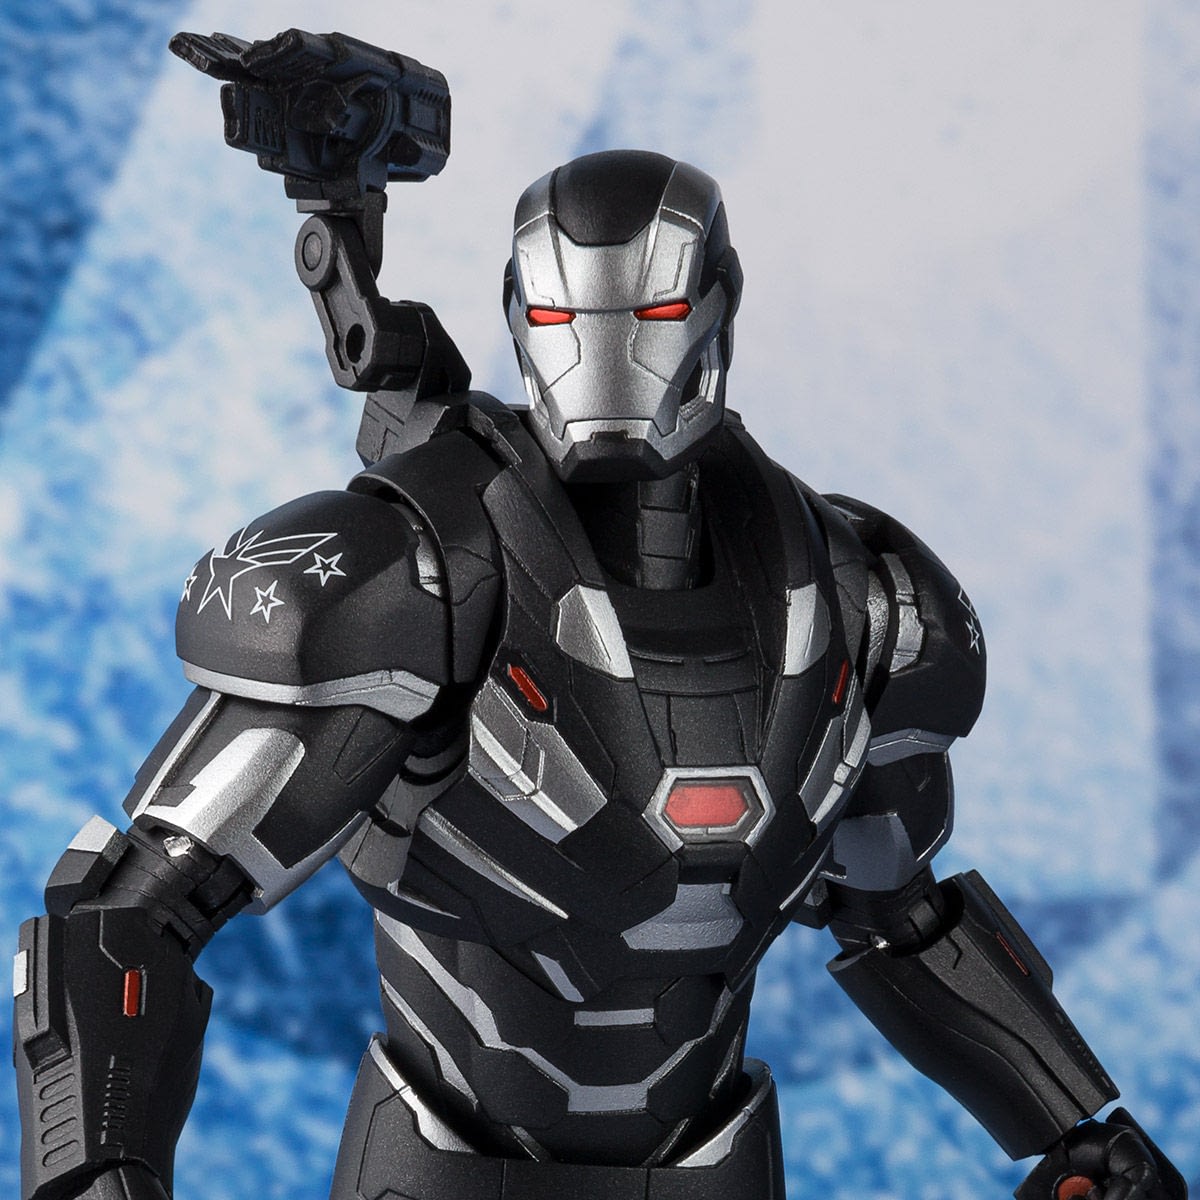 War Machine Joins The Endgame With New Sh Figuarts Figure